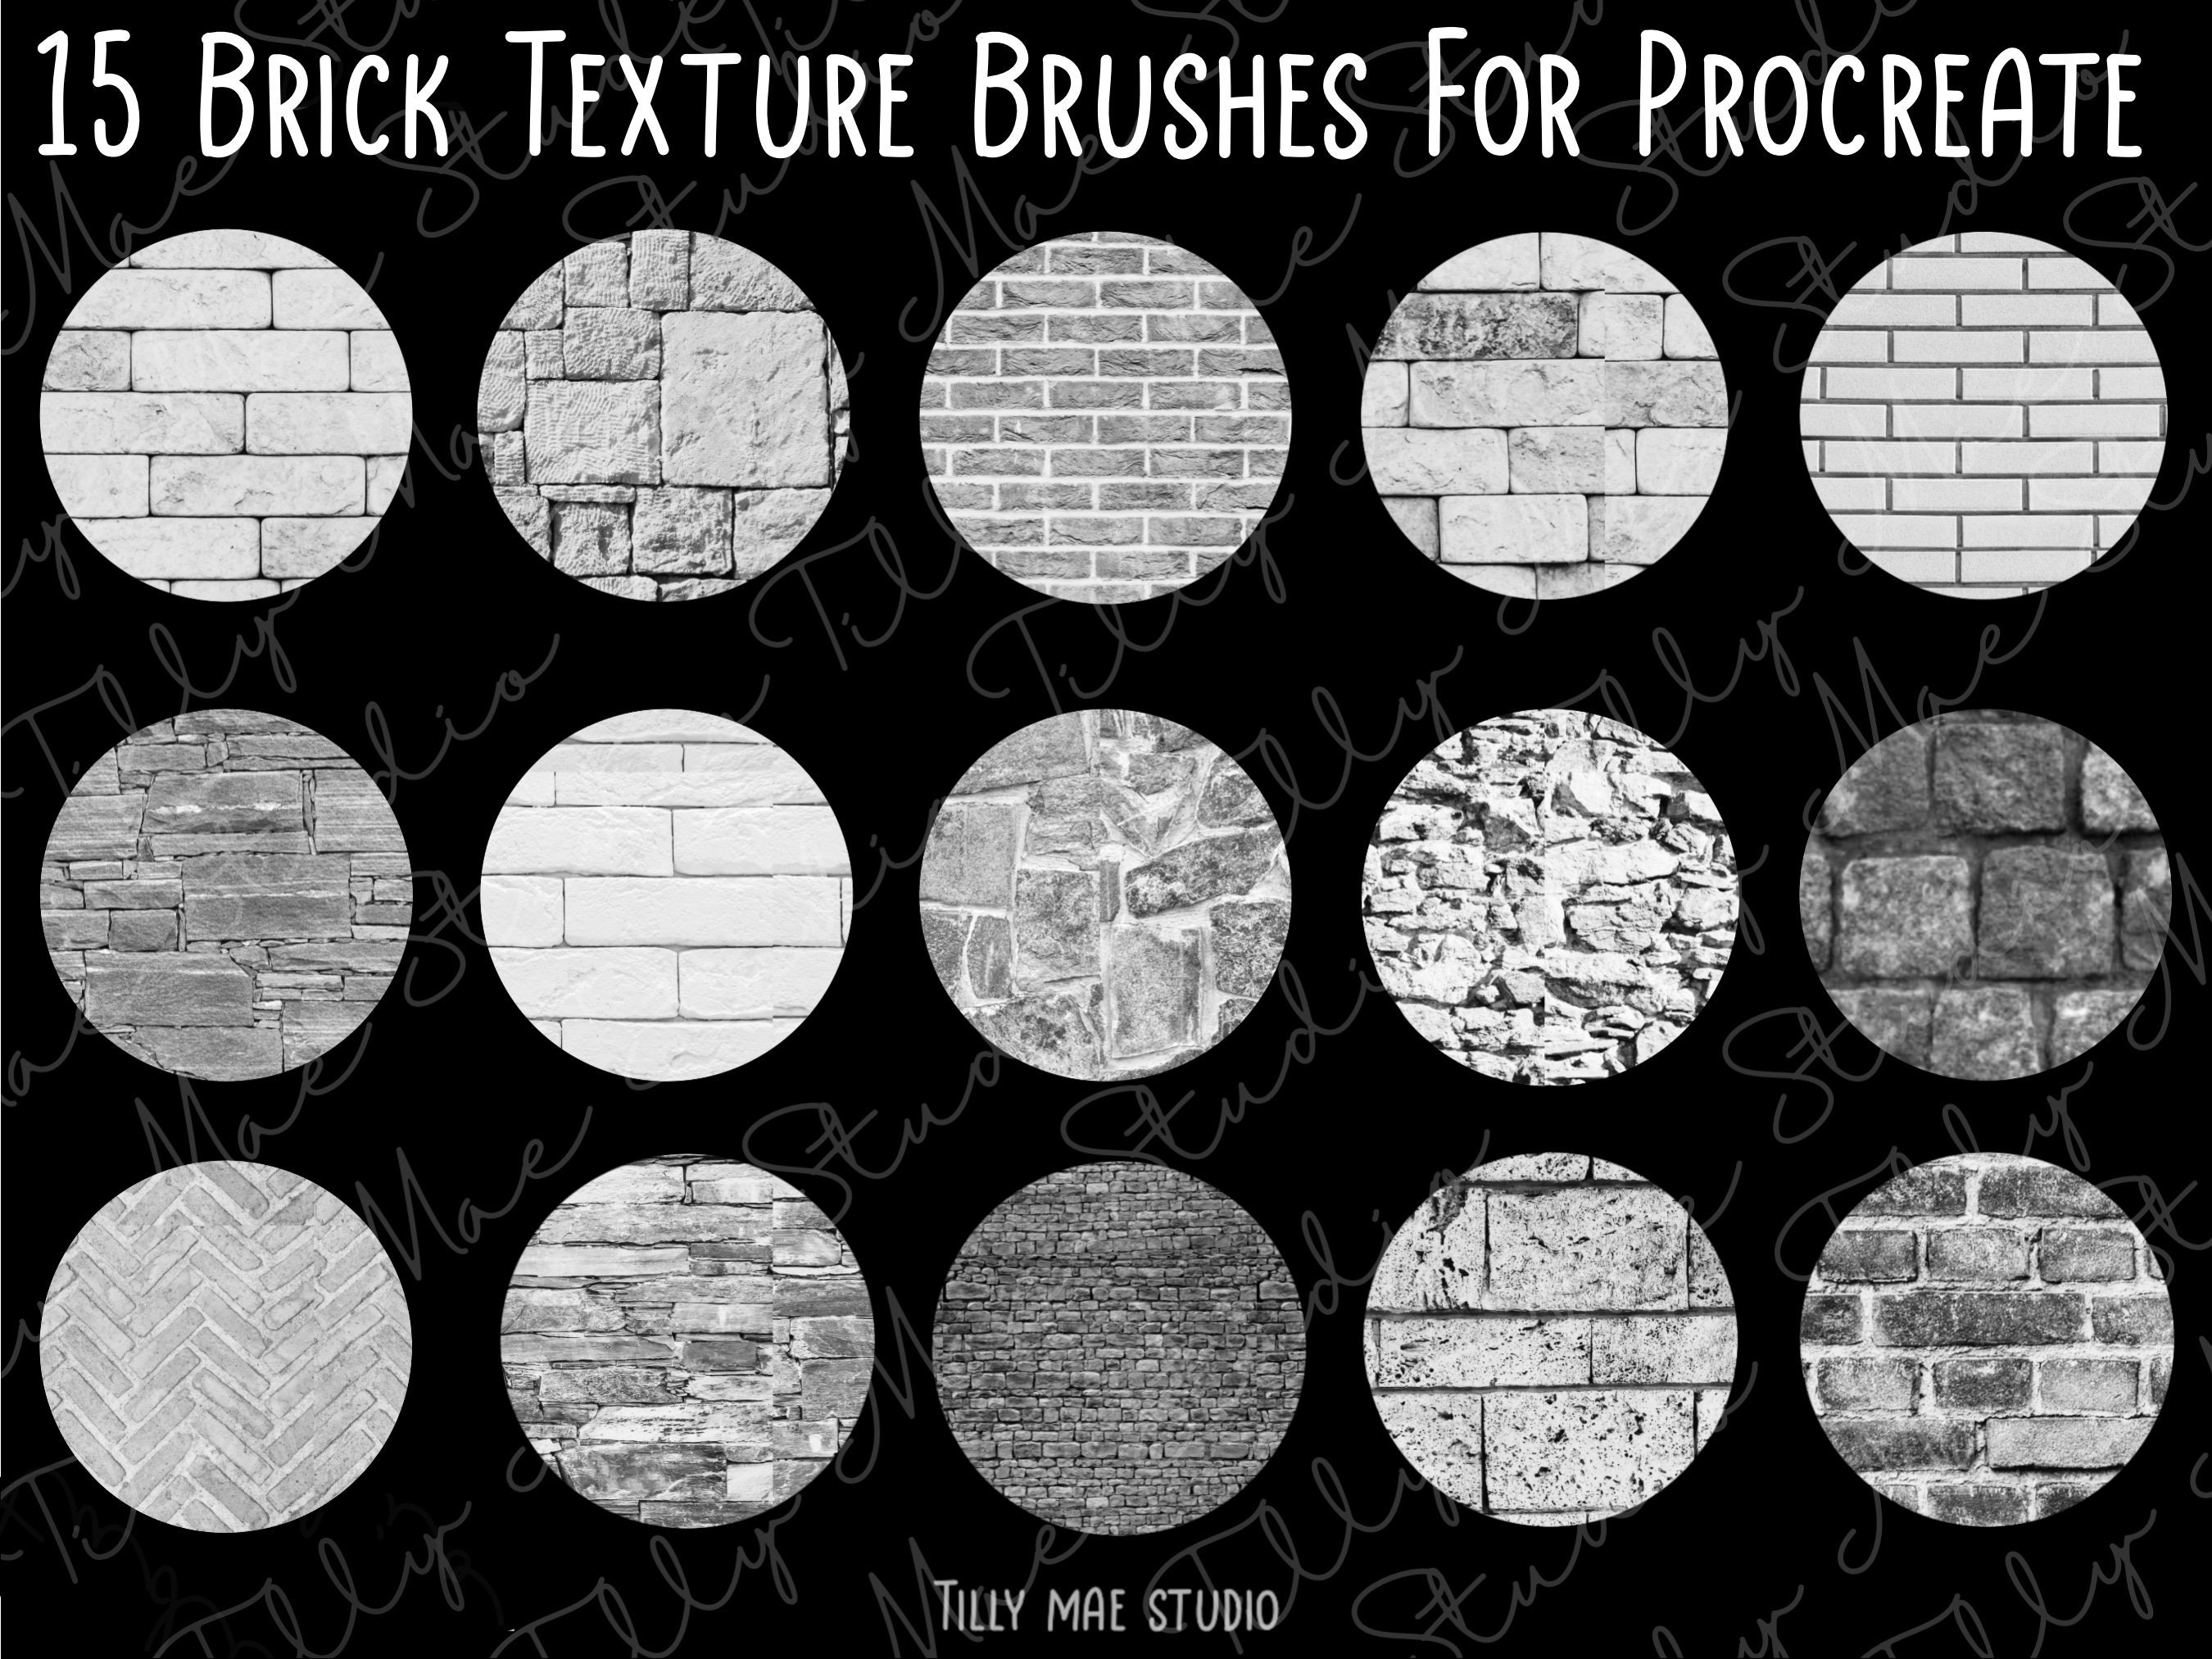 Brick Wall Texture Roller High Quality Texture for Modeling Clay 7